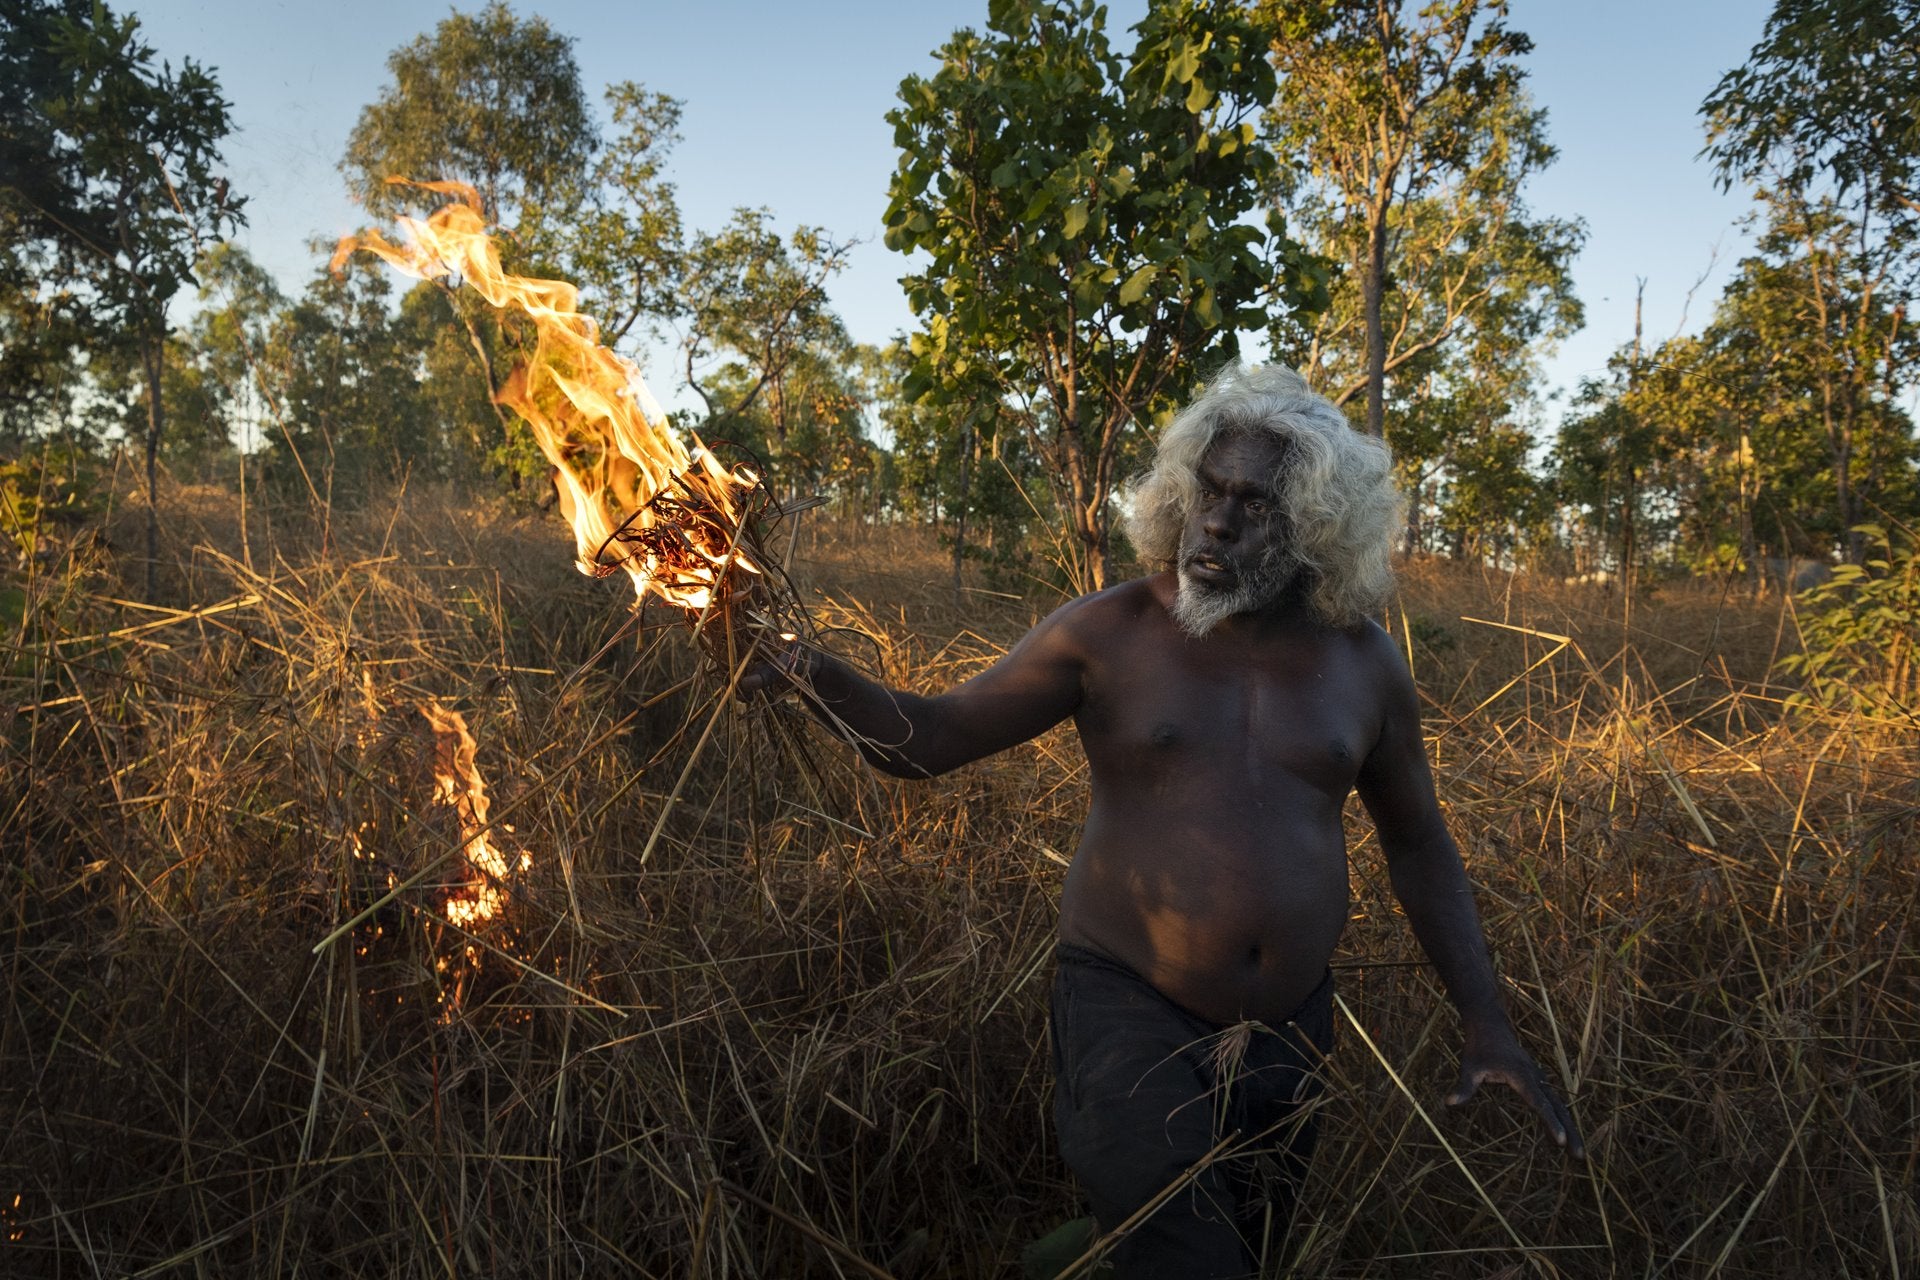 Australian photographer Matthew Abbott won the Stories category for Saving Forests with Fire, his series documenting how Indigenous Australians have strategically set fires to protect the environment and stop fuel building up that would lead to larger, more devastating fires.